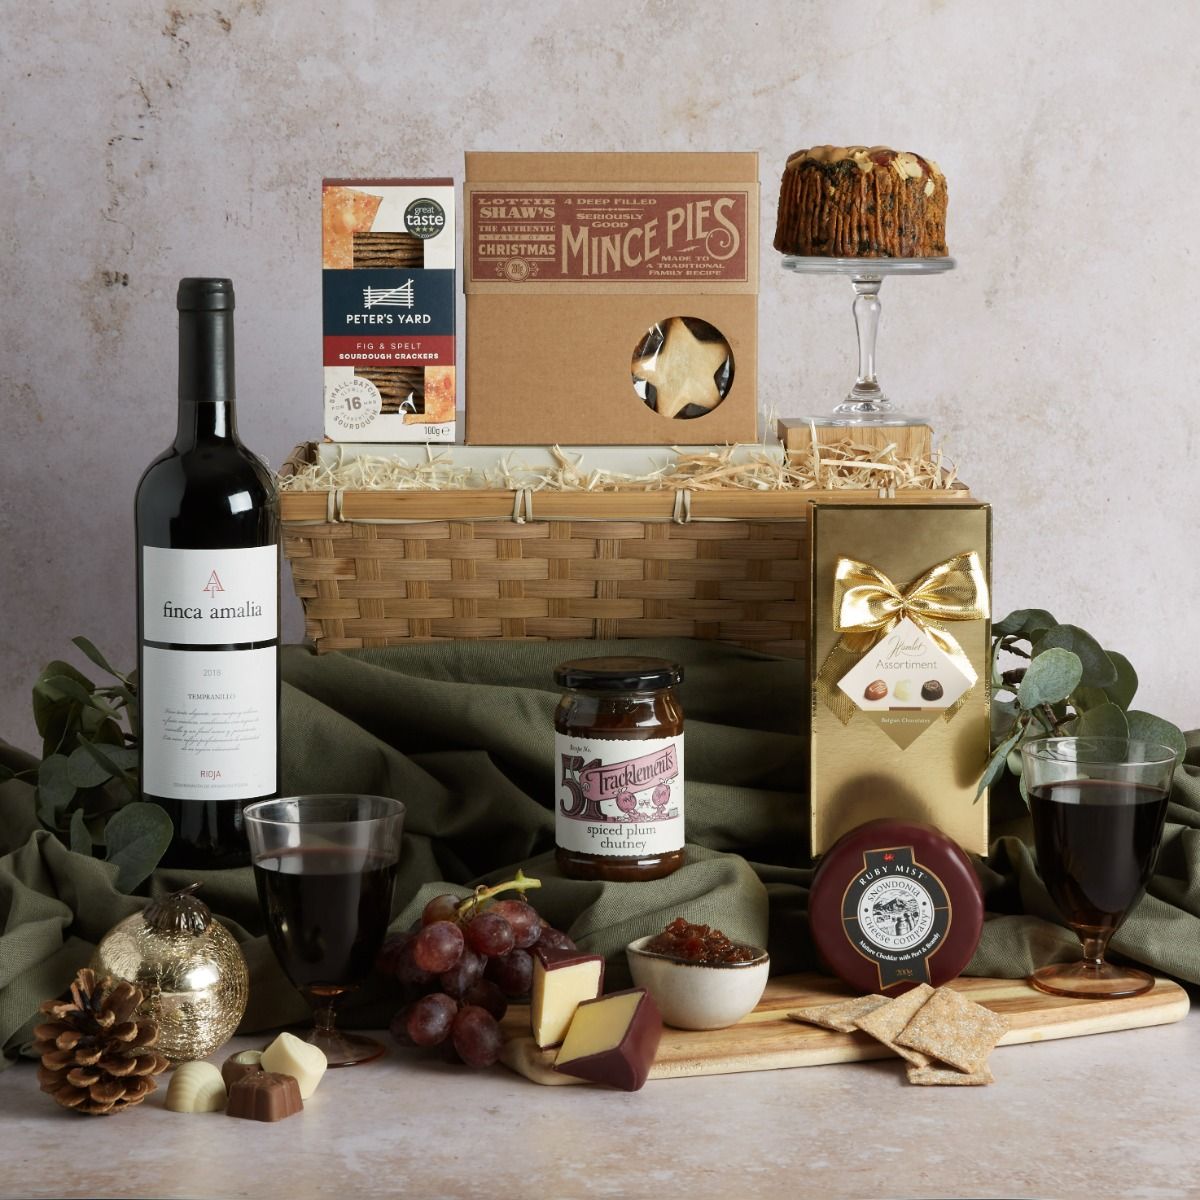 The Classic Christmas Hamper with contents on display and bamboo gift basket